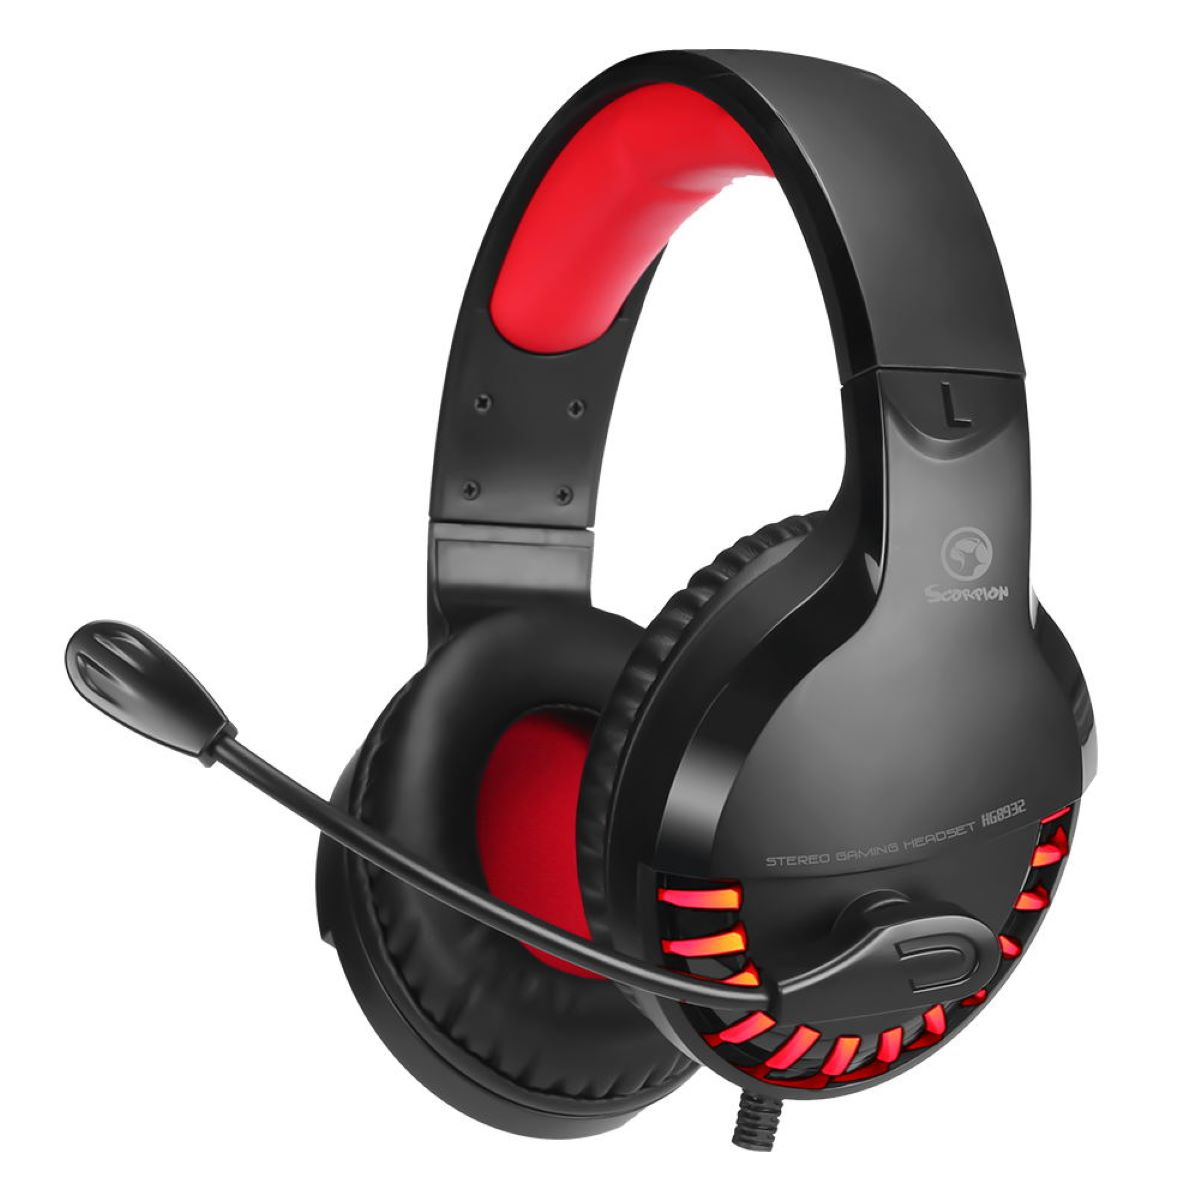 MARVO HG8932 Wired, Over-ear schwarz/rot Gaming Headset